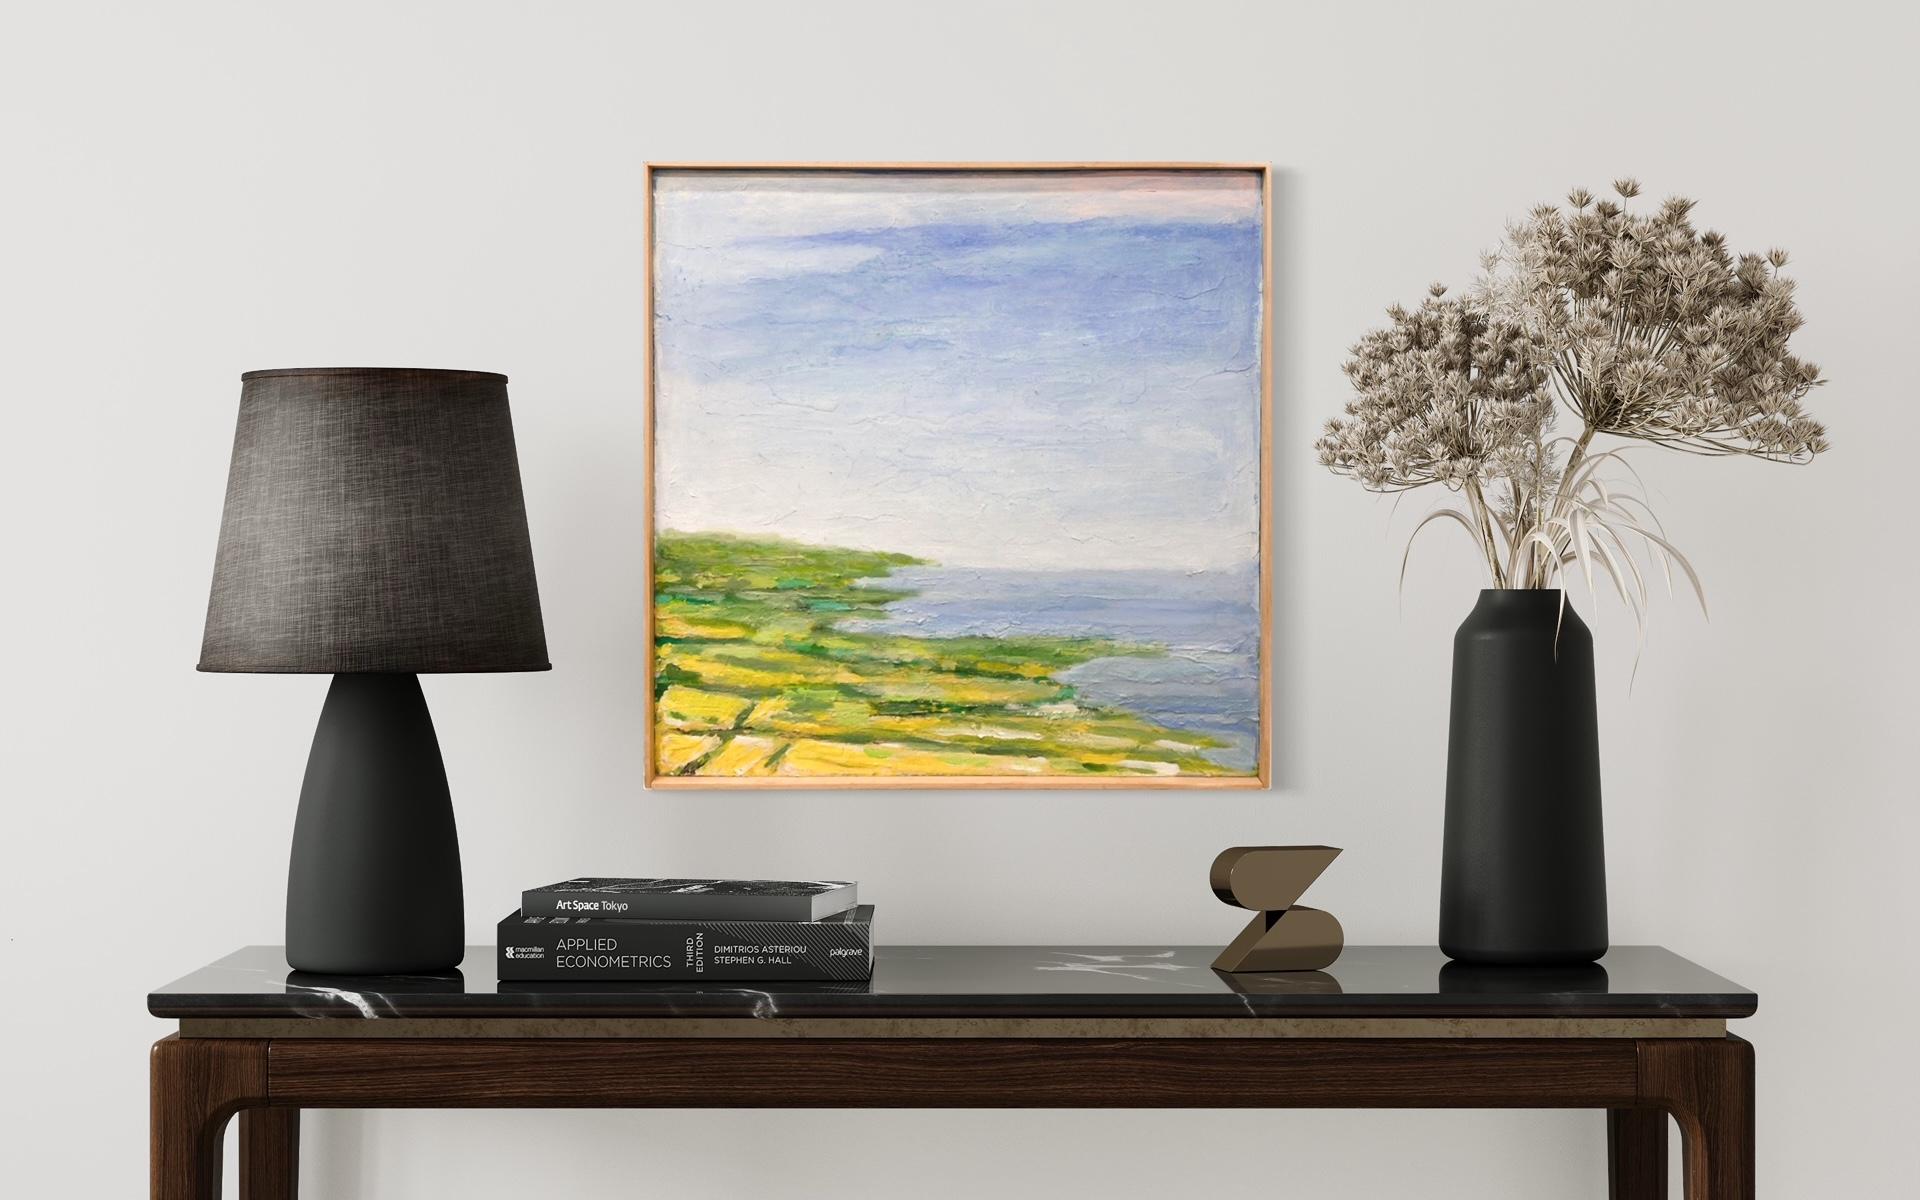 This is a lovely contemporary landscape painting, painted in a somewhat loose style, yet with strong underpinnings to earlier traditional landscape painting.  The use of color is calming and harmonious.  The artist deftly navigates the viewers eye